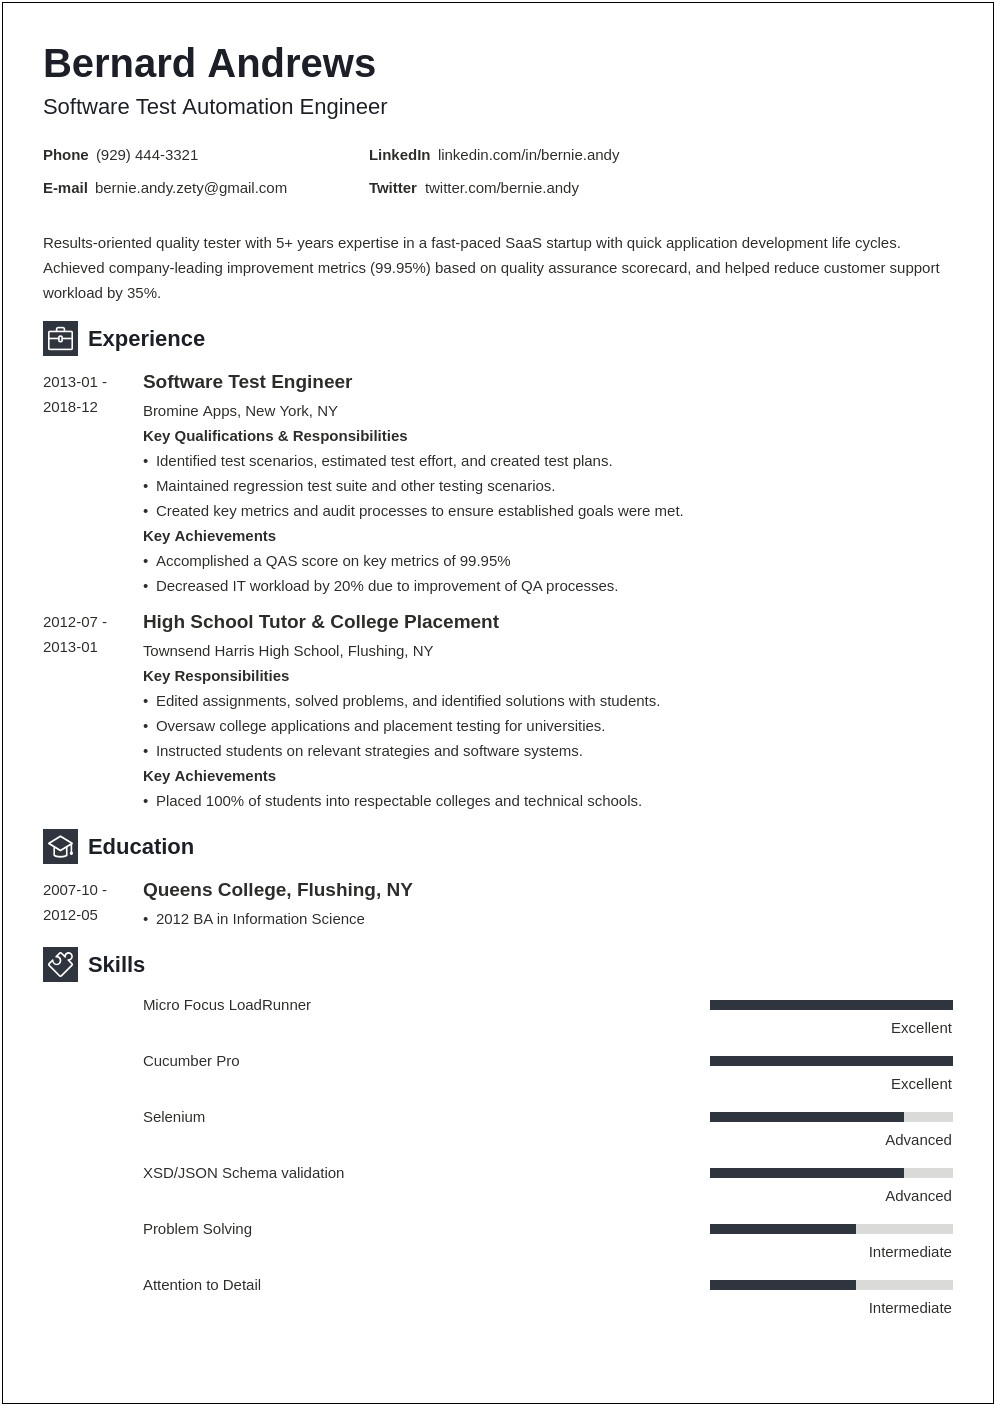 One Year Experience Manual Testing Resume